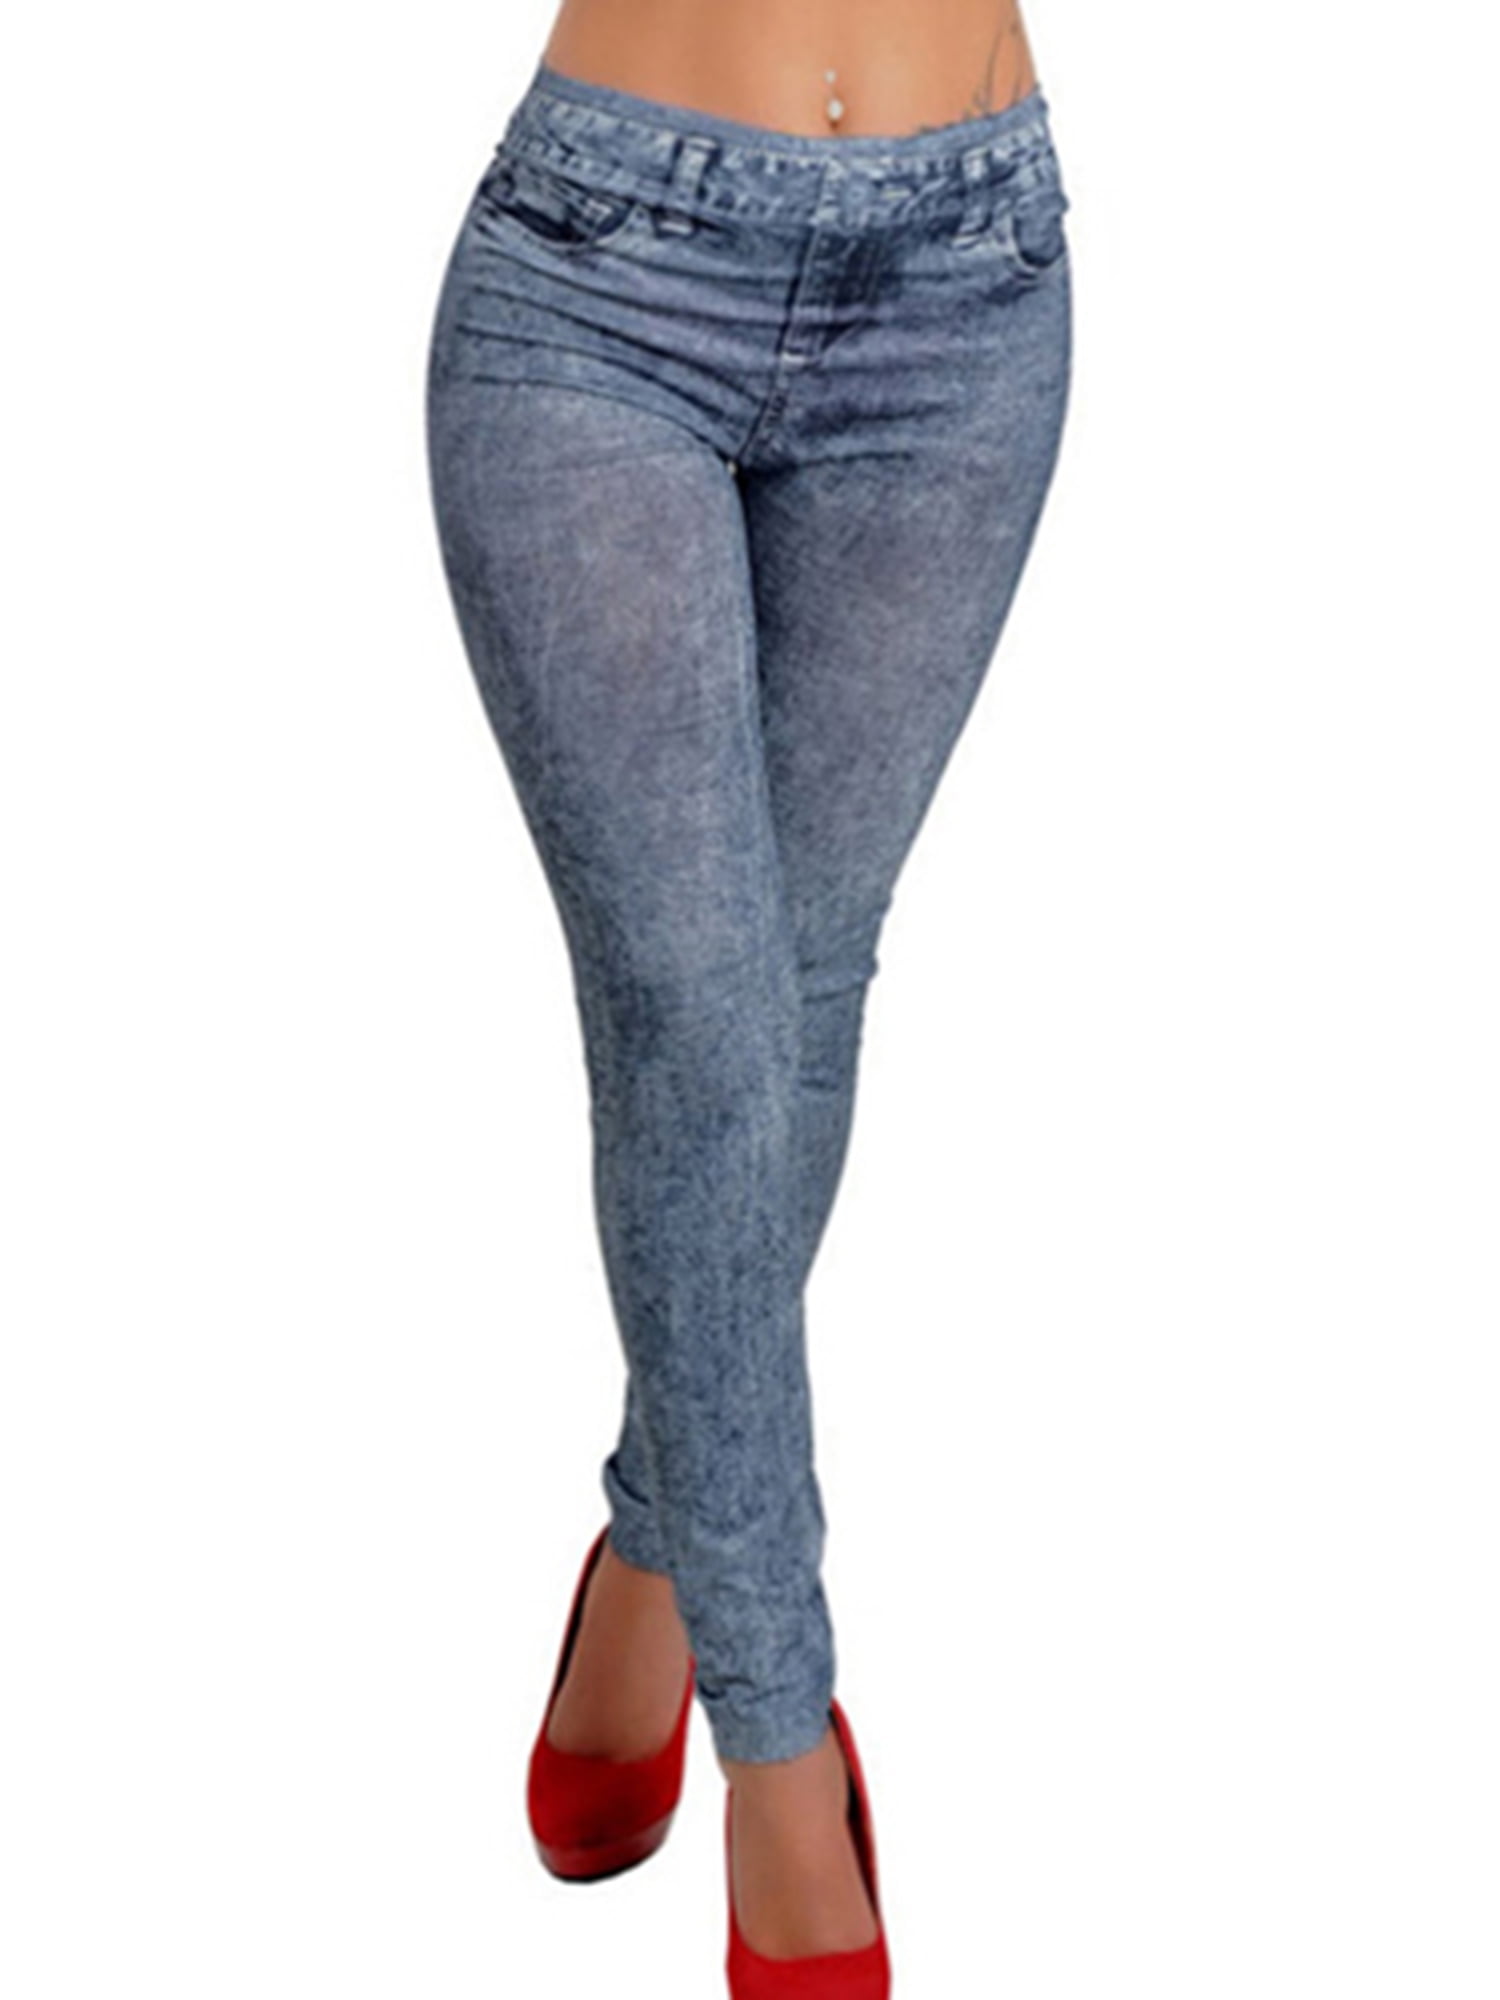 soft and stretchy jeans